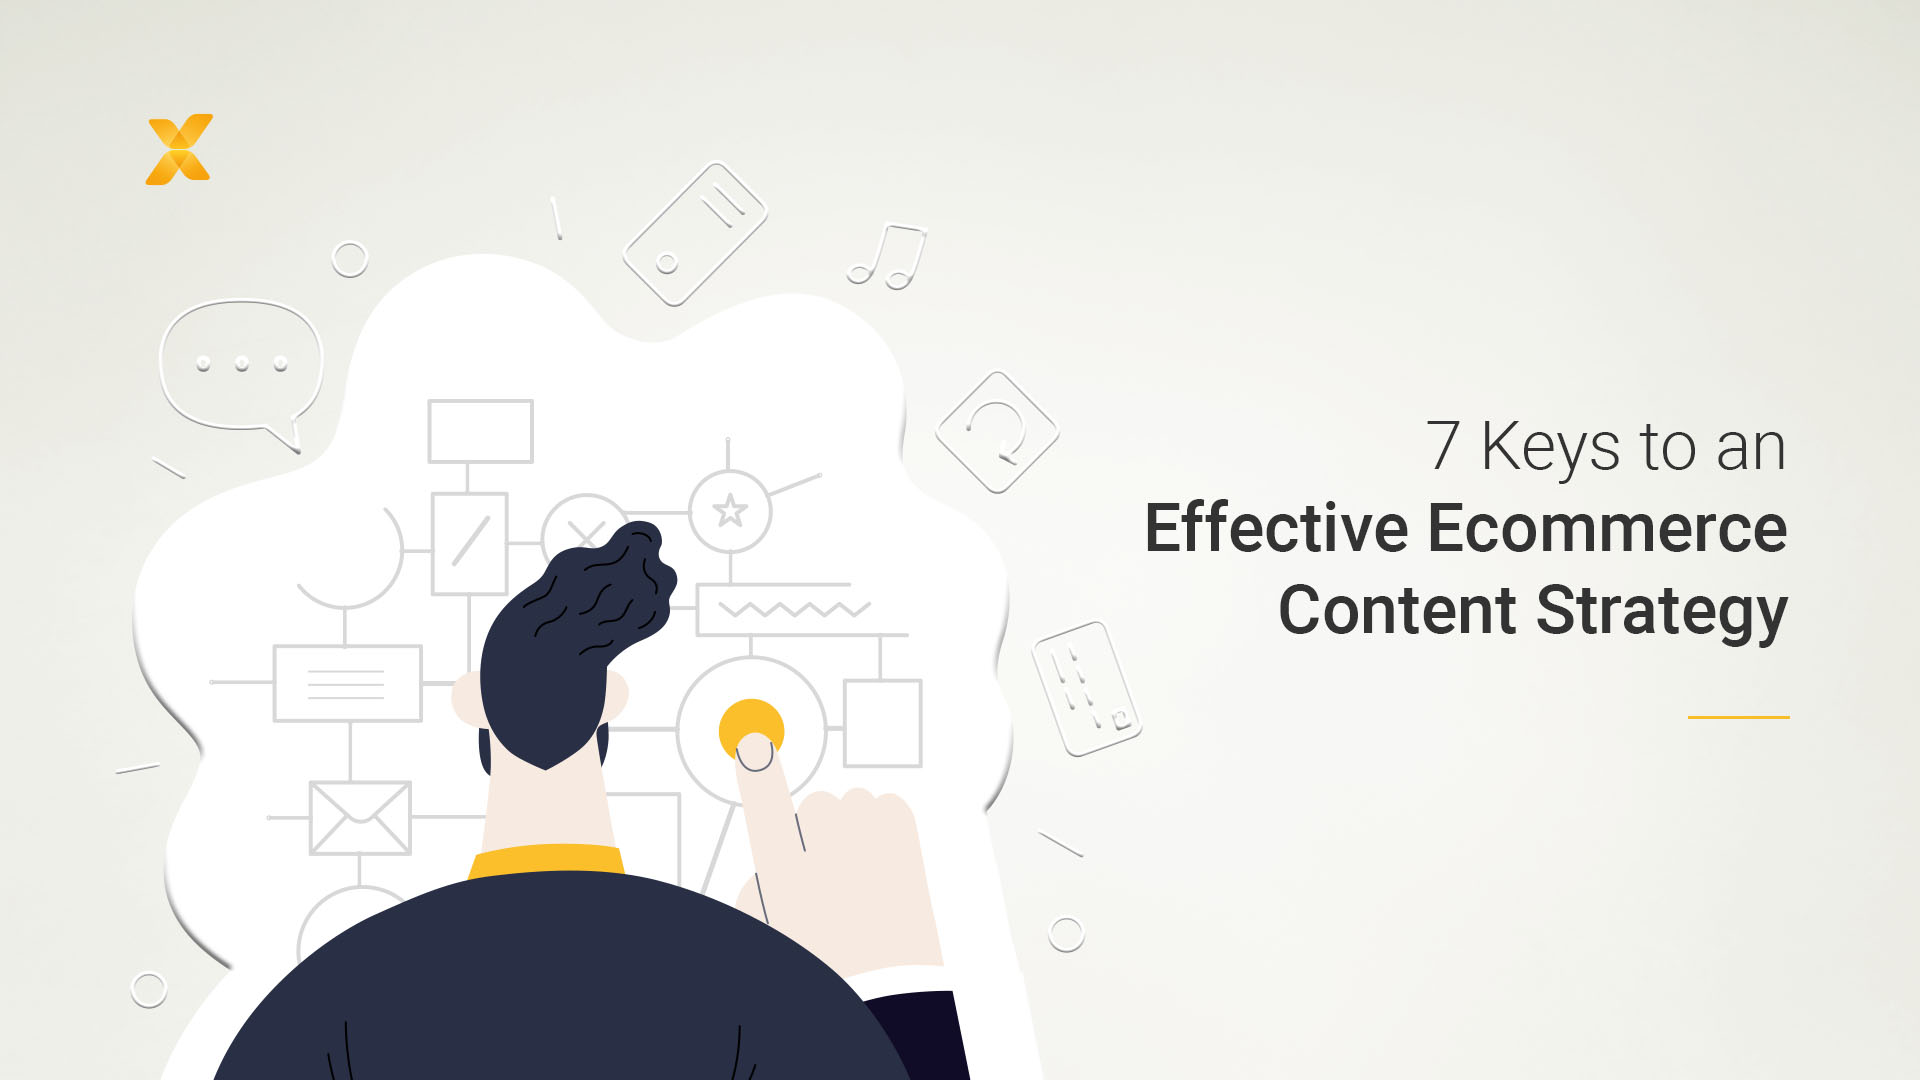 7 Keys to an Effective Ecommerce Strategy